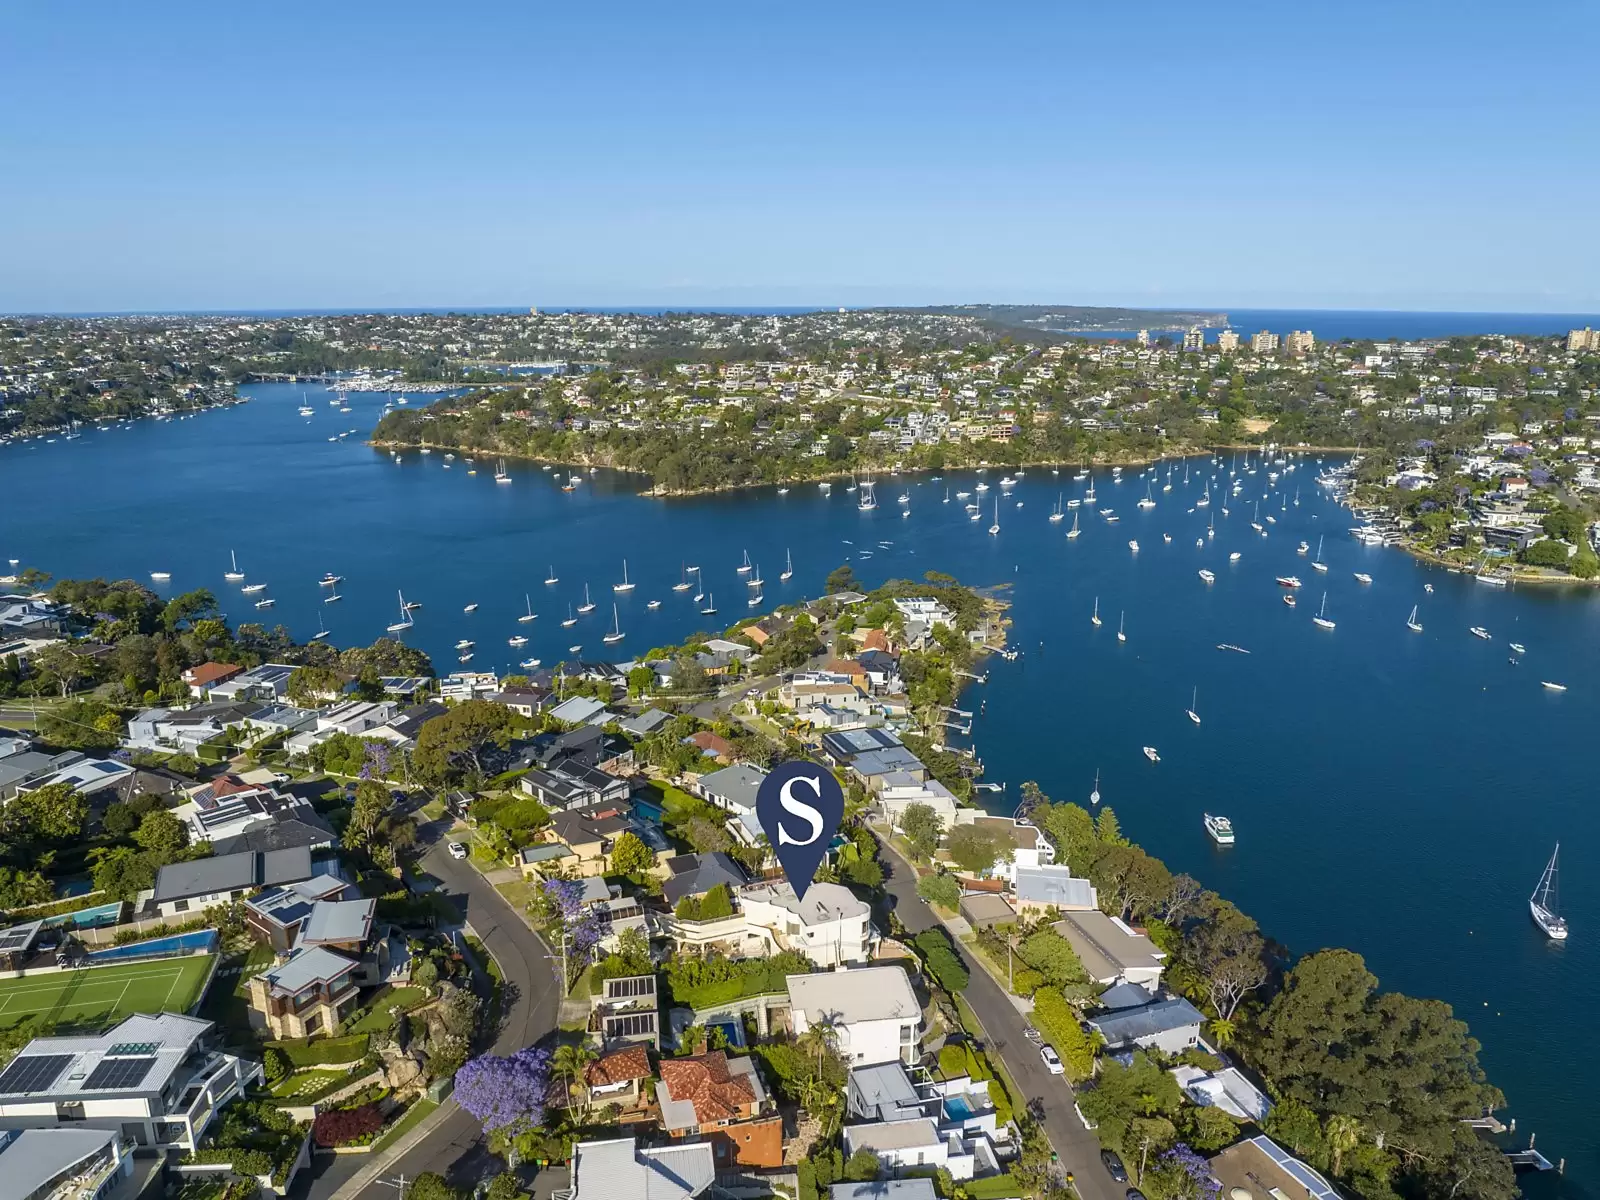 Photo #5: 19 Weemala Road, Northbridge - Sold by Sydney Sotheby's International Realty